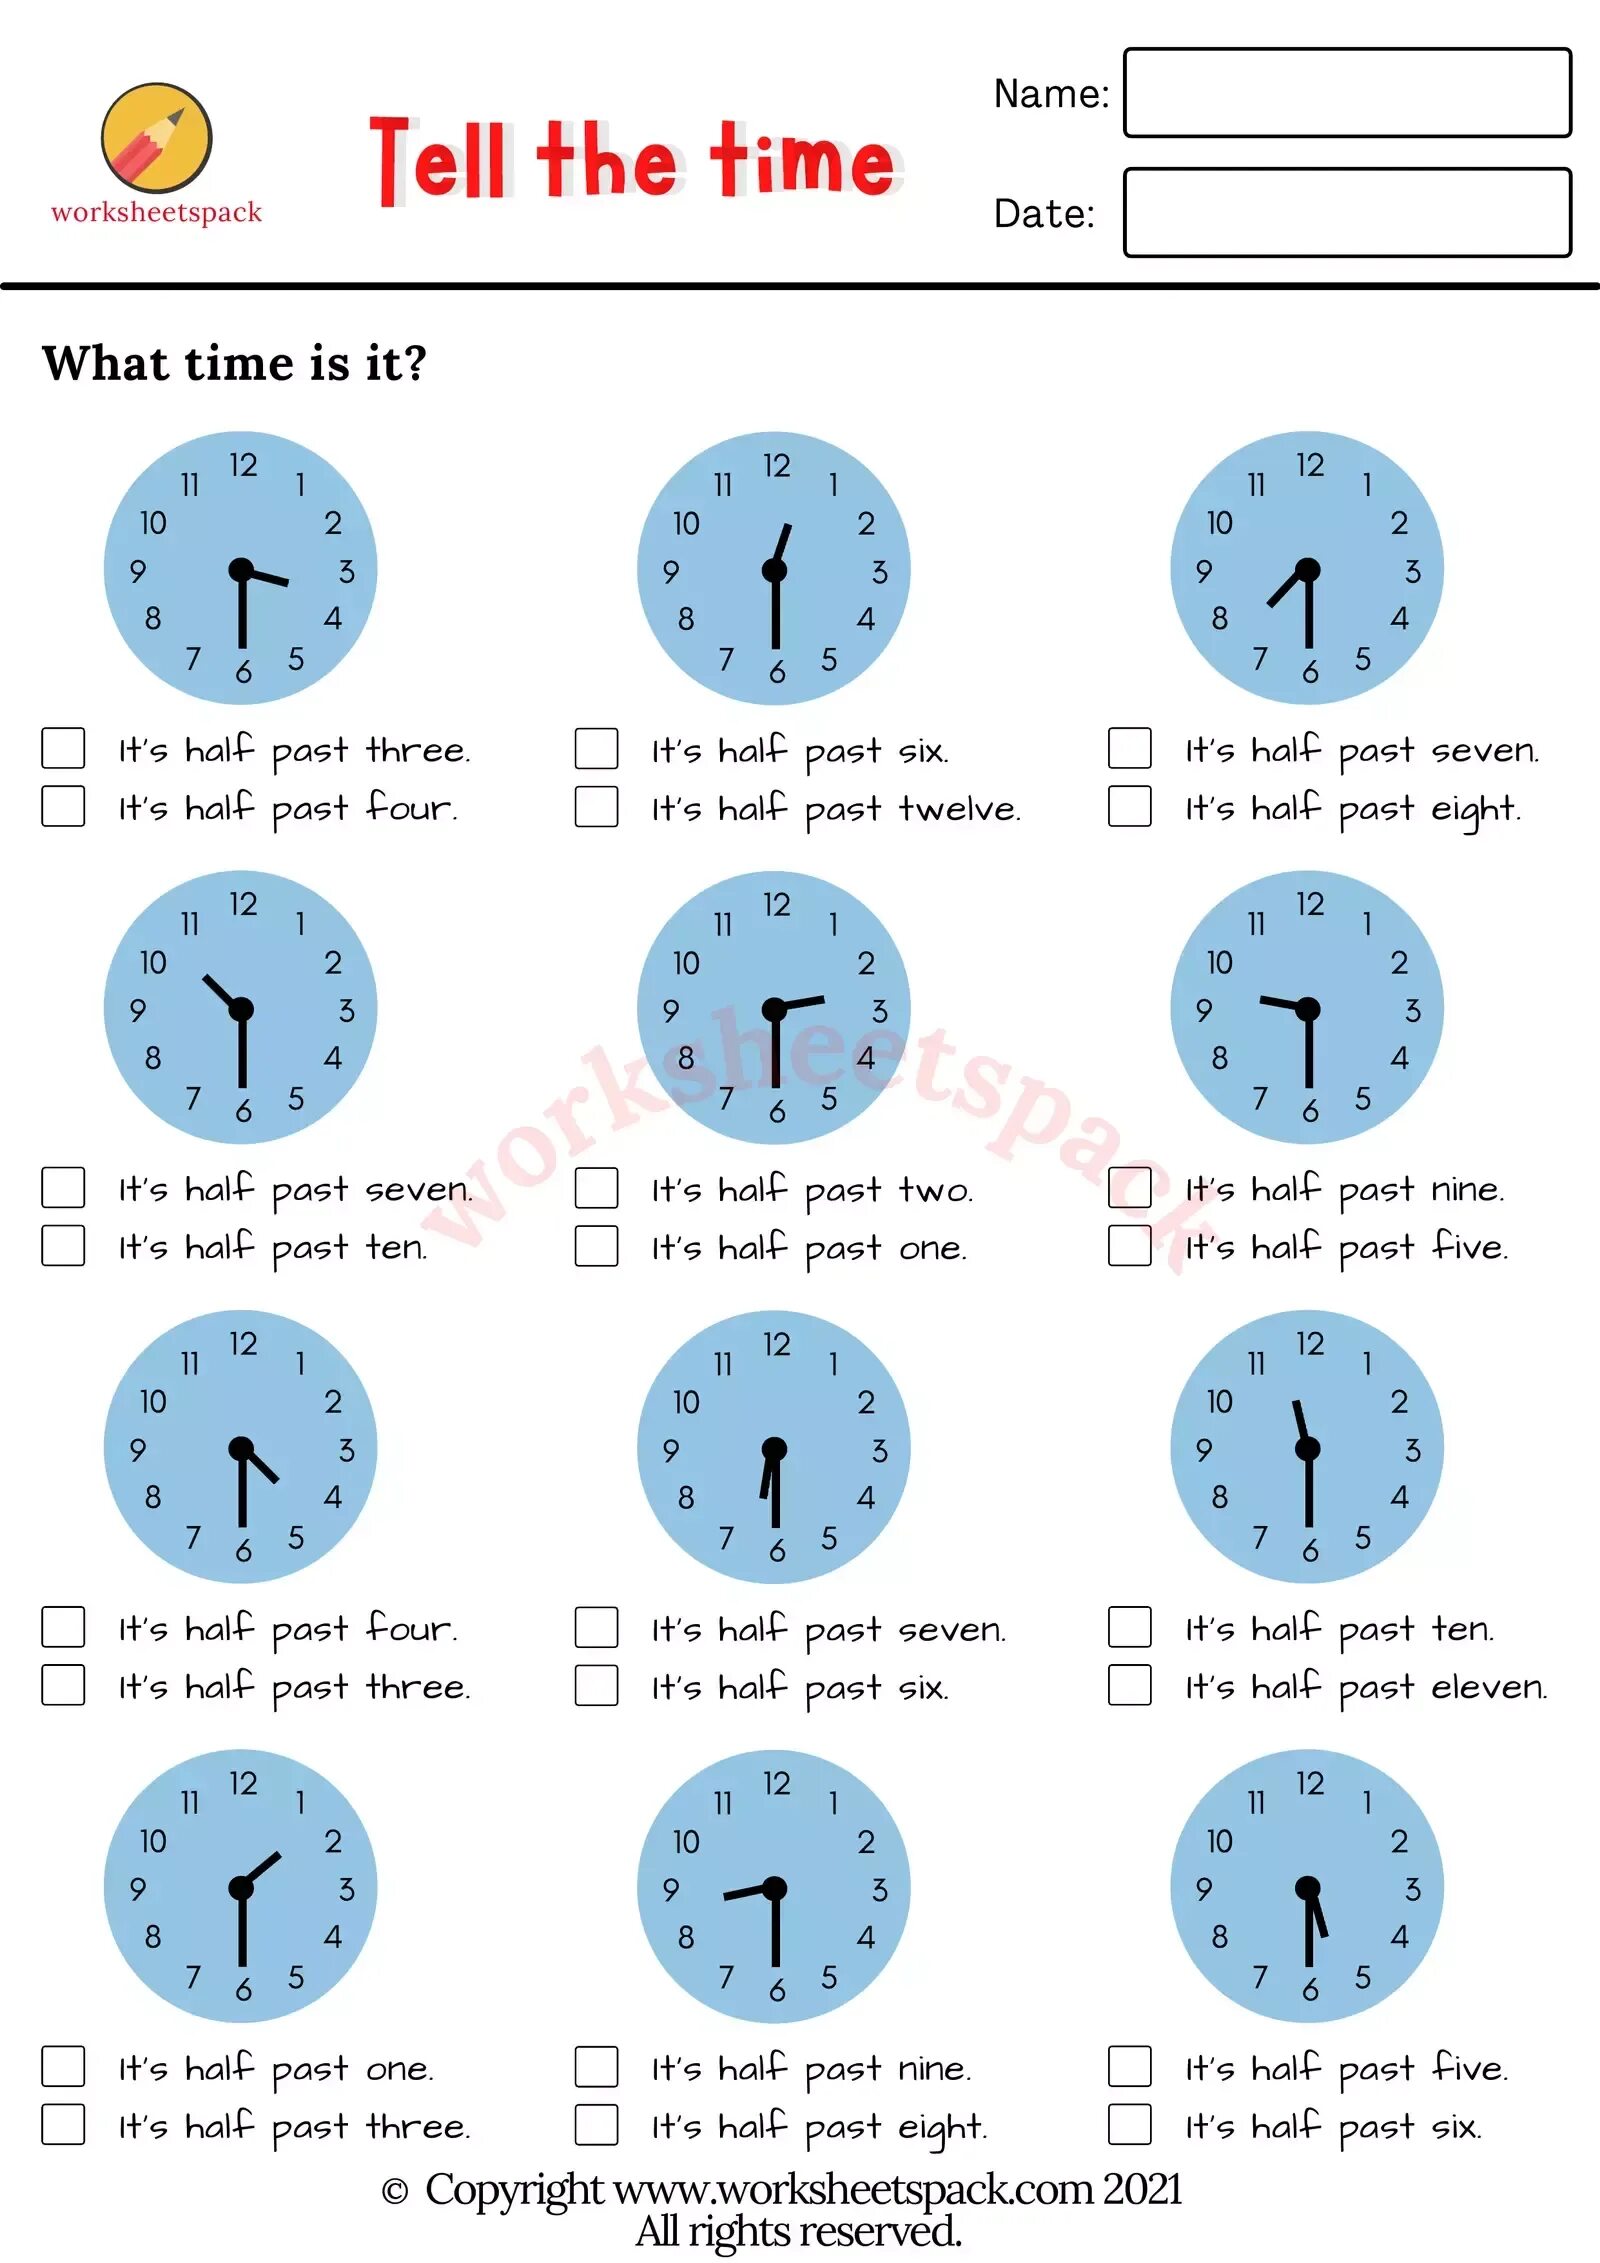 Telling the time worksheet. Telling the time Worksheets 4 класс. Telling the time упражнения. Telling the time in English Worksheets. Telling time in English for Kids.